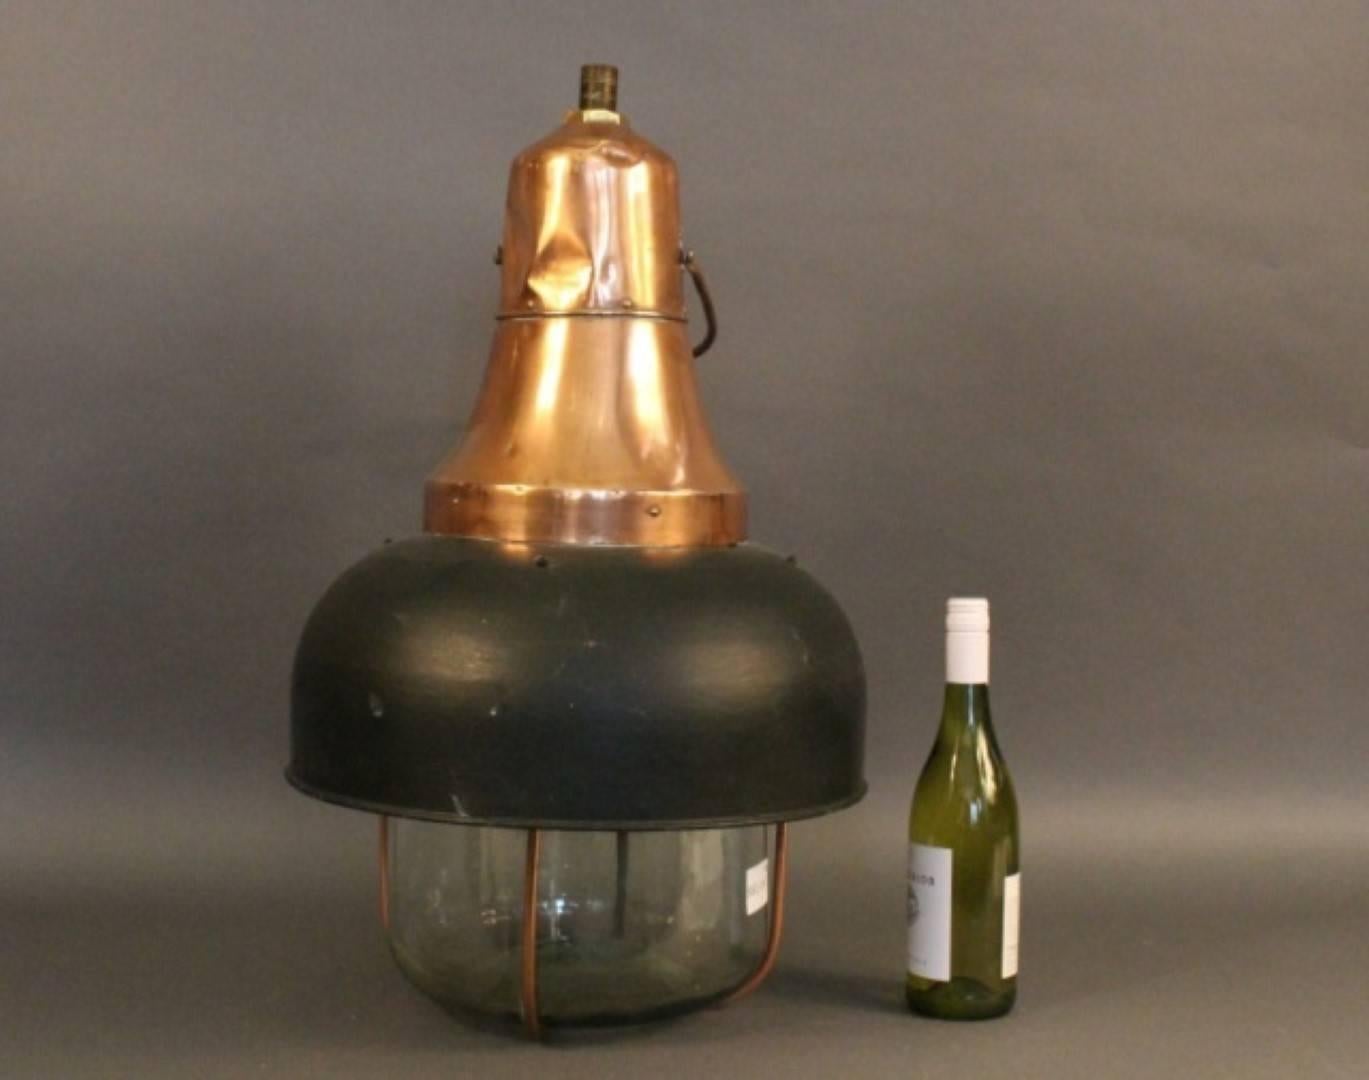 Large hanging light with copper housing and hood. Glass jug as a bulb cover with protective bars. Unusual design. Overall dimensions: 32